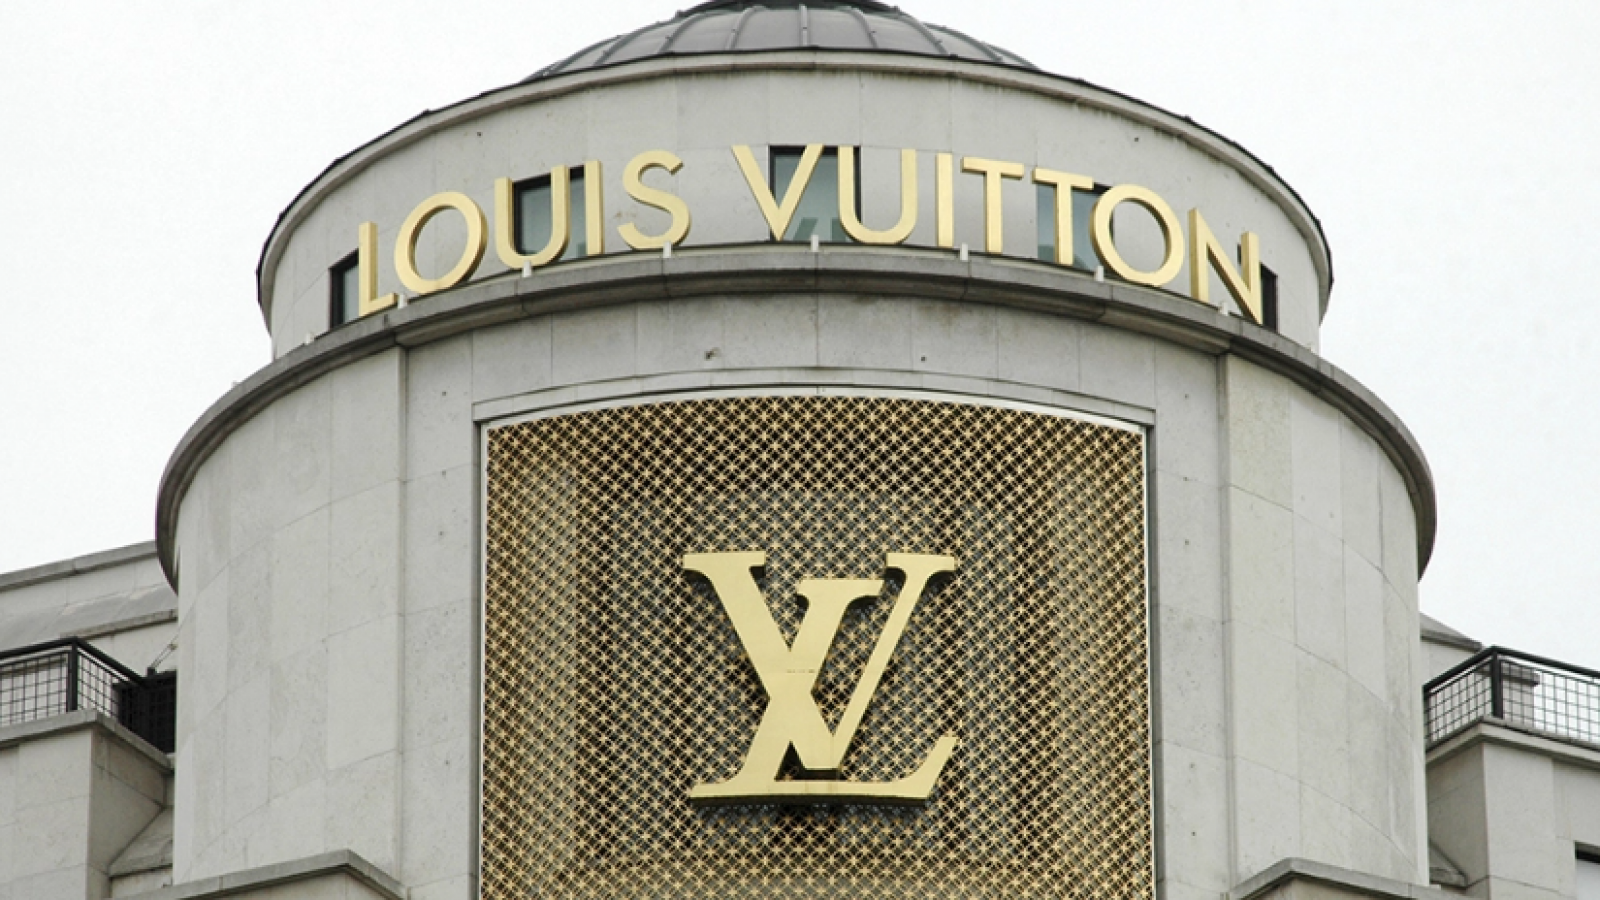 LVMH Gains to Record as Louis Vuitton, Dior Fuel Growth - Bloomberg